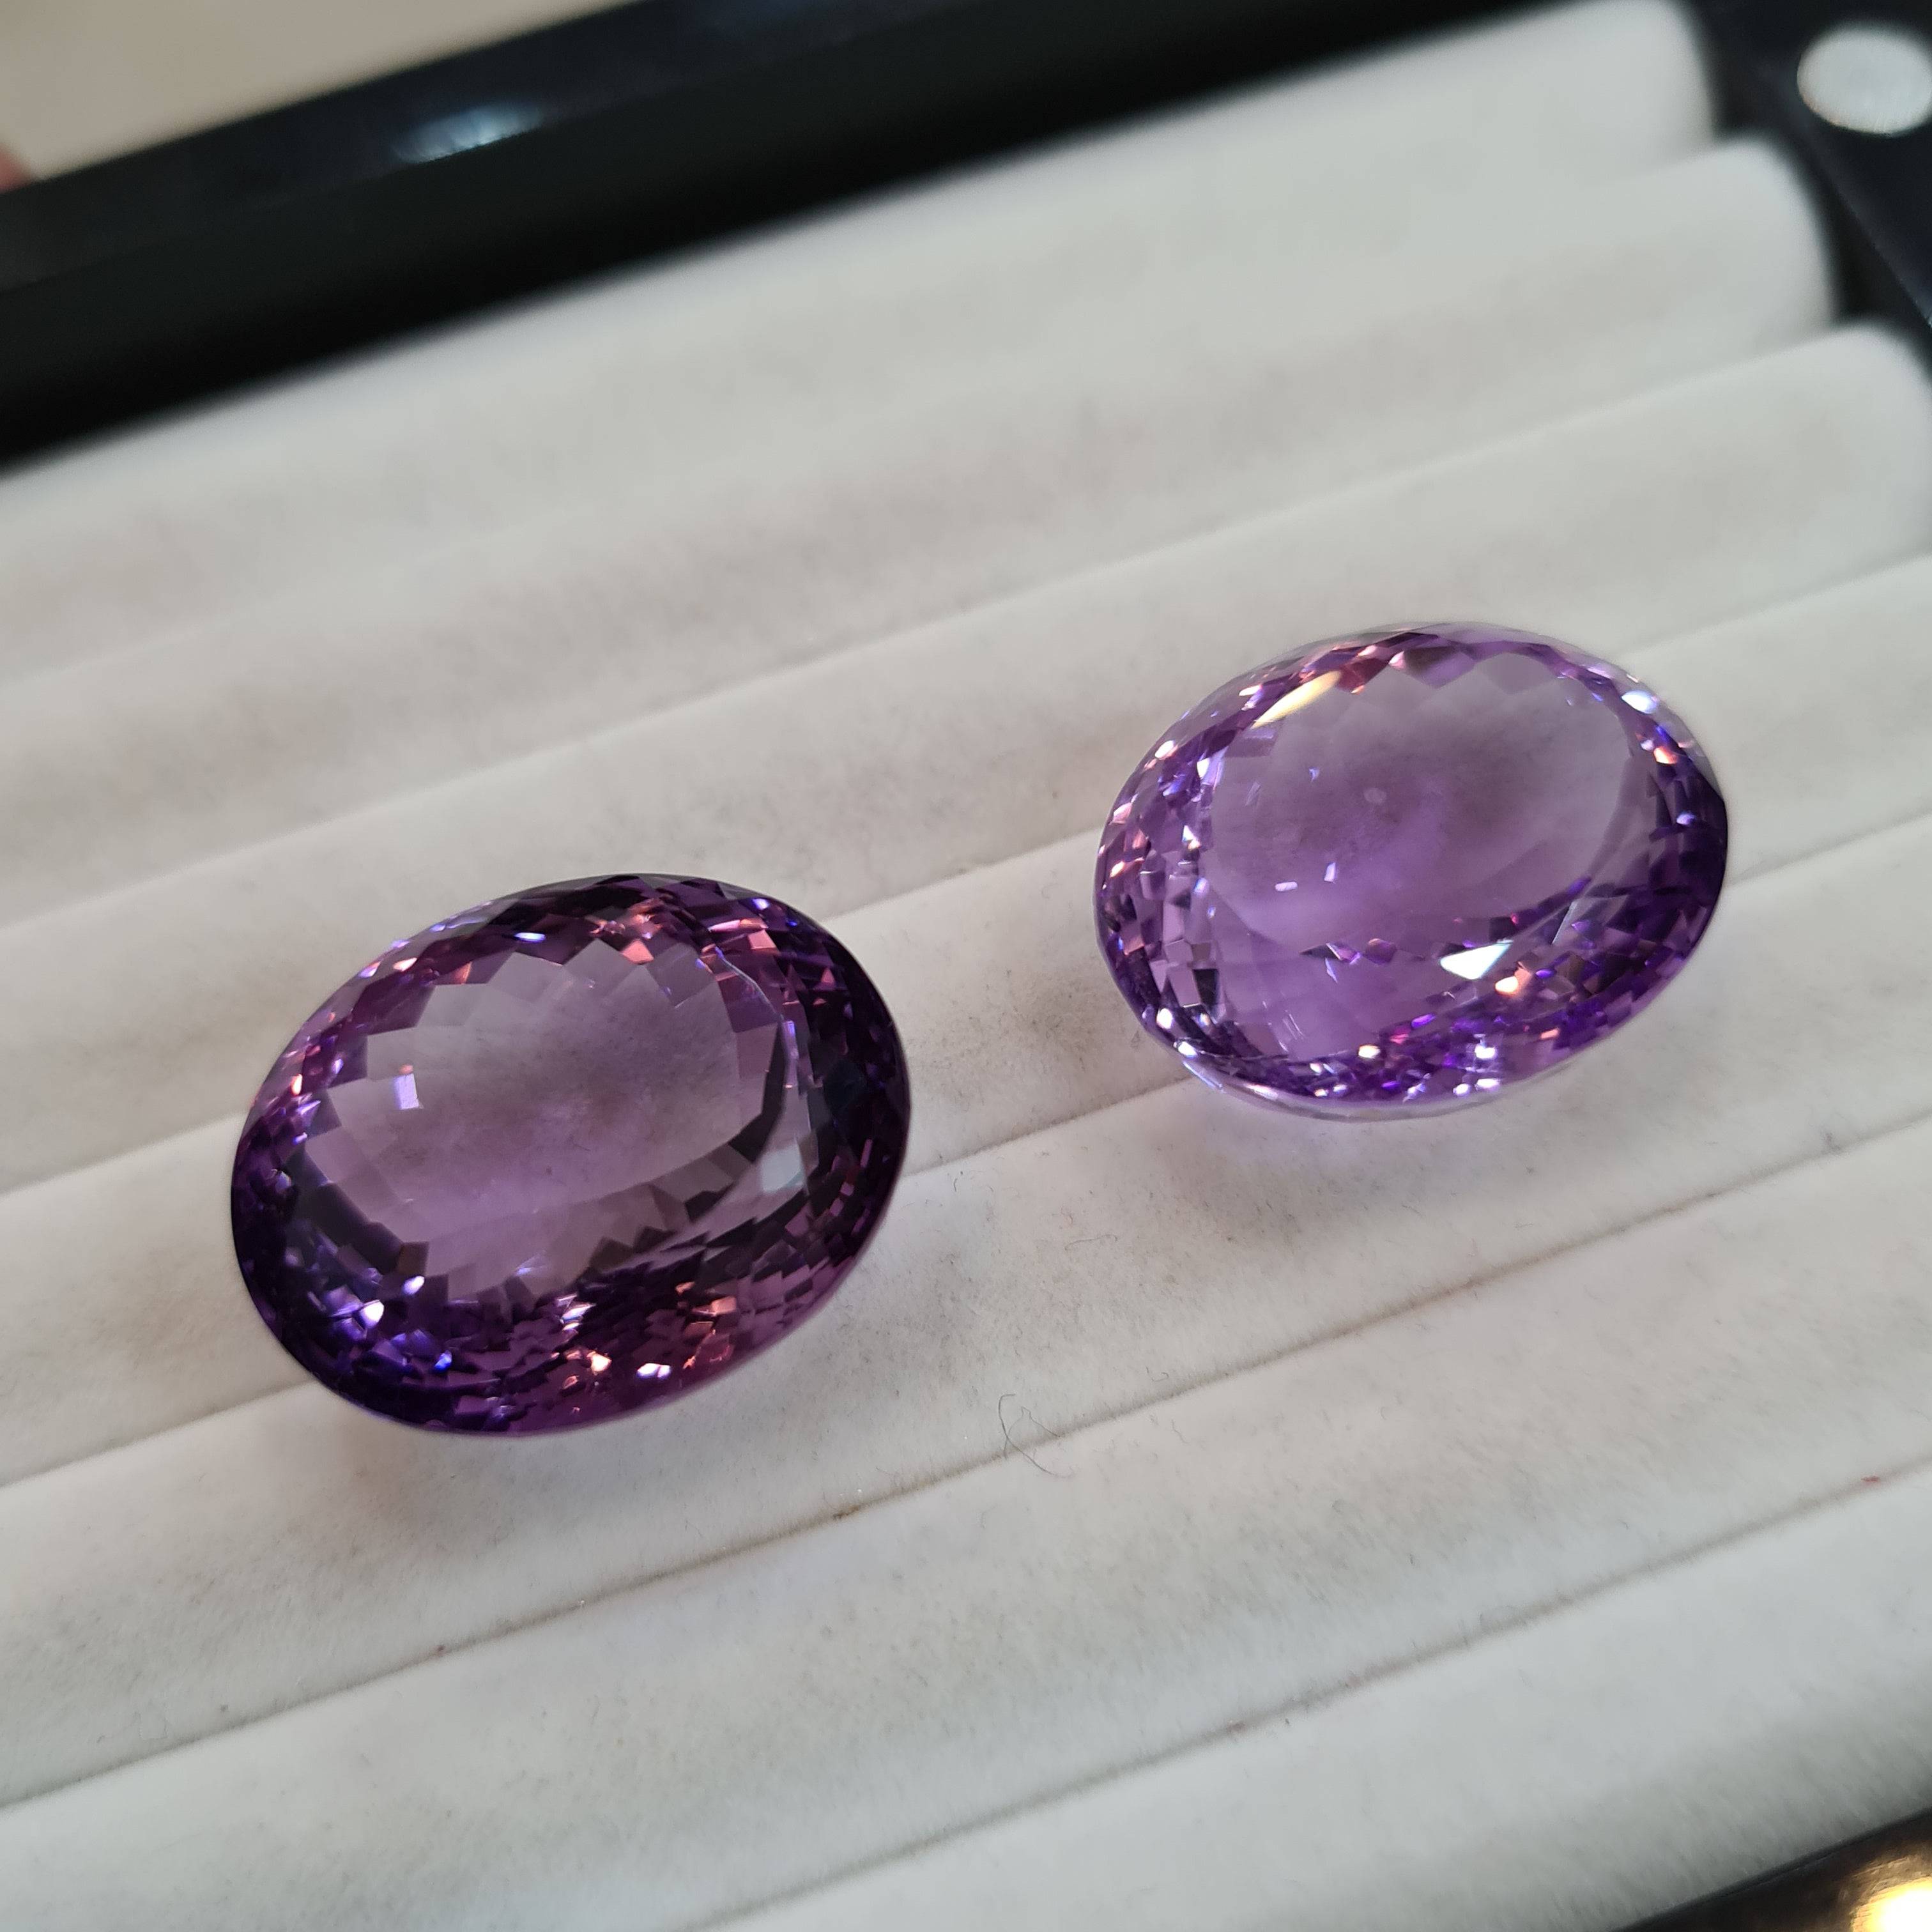 2 Pcs  Natural Amethyst Faceted Gemstone | Size: 22x18mm, Oval Shape  | Flawless - The LabradoriteKing